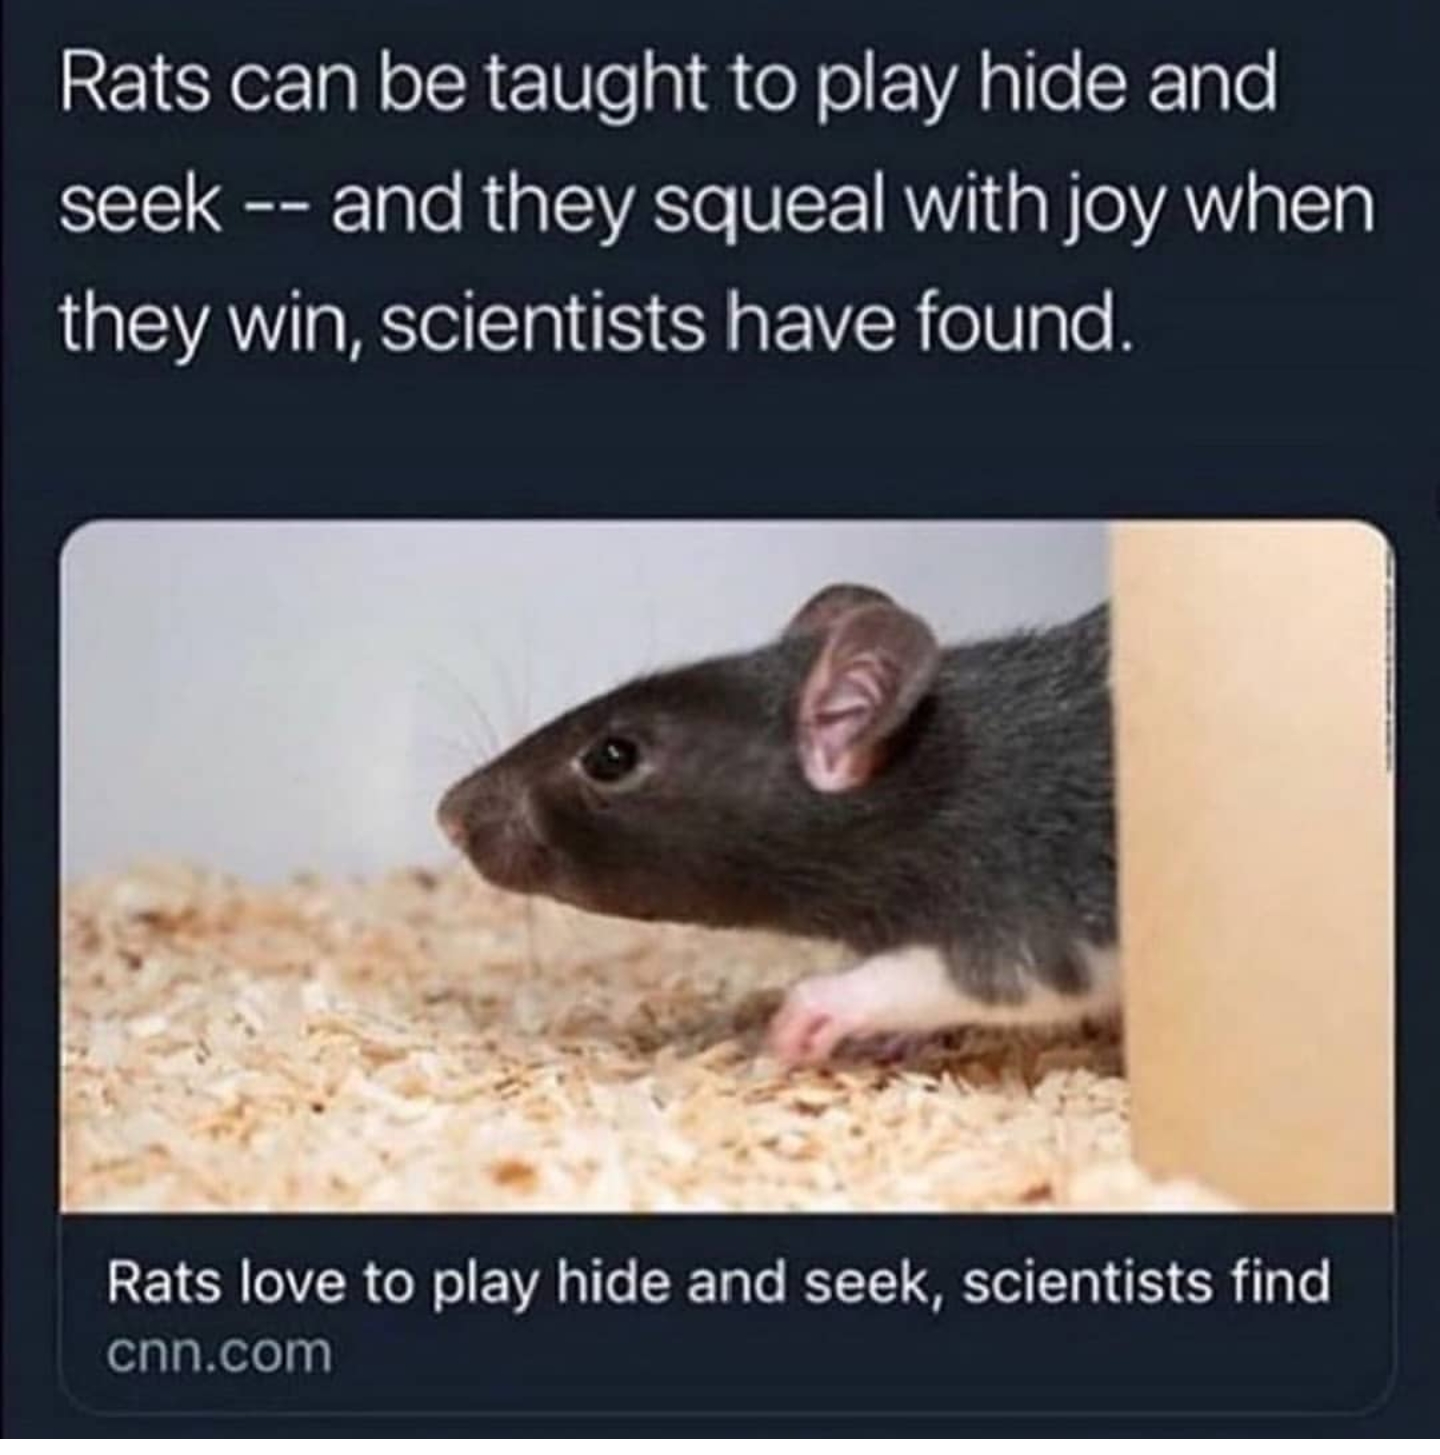 screenshot sharing that cnn wrote an article titled "rats love to play hide and seek, scientists find" and "they squeal with joy when they win, scientists have found."